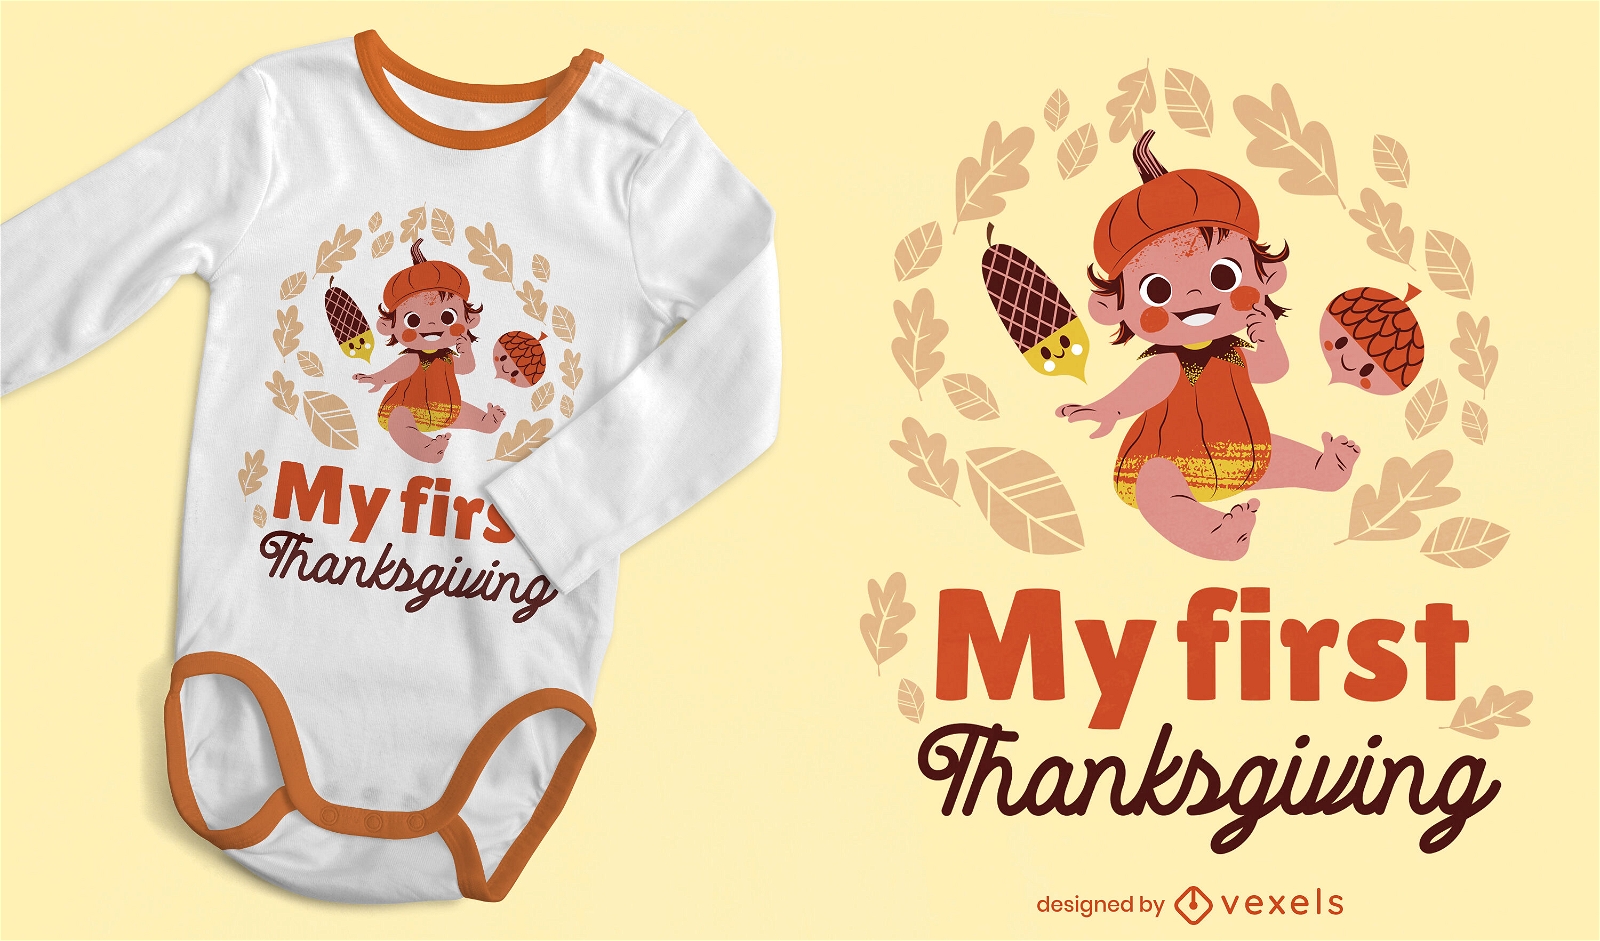 Baby first thanksgiving holiday t-shirt design